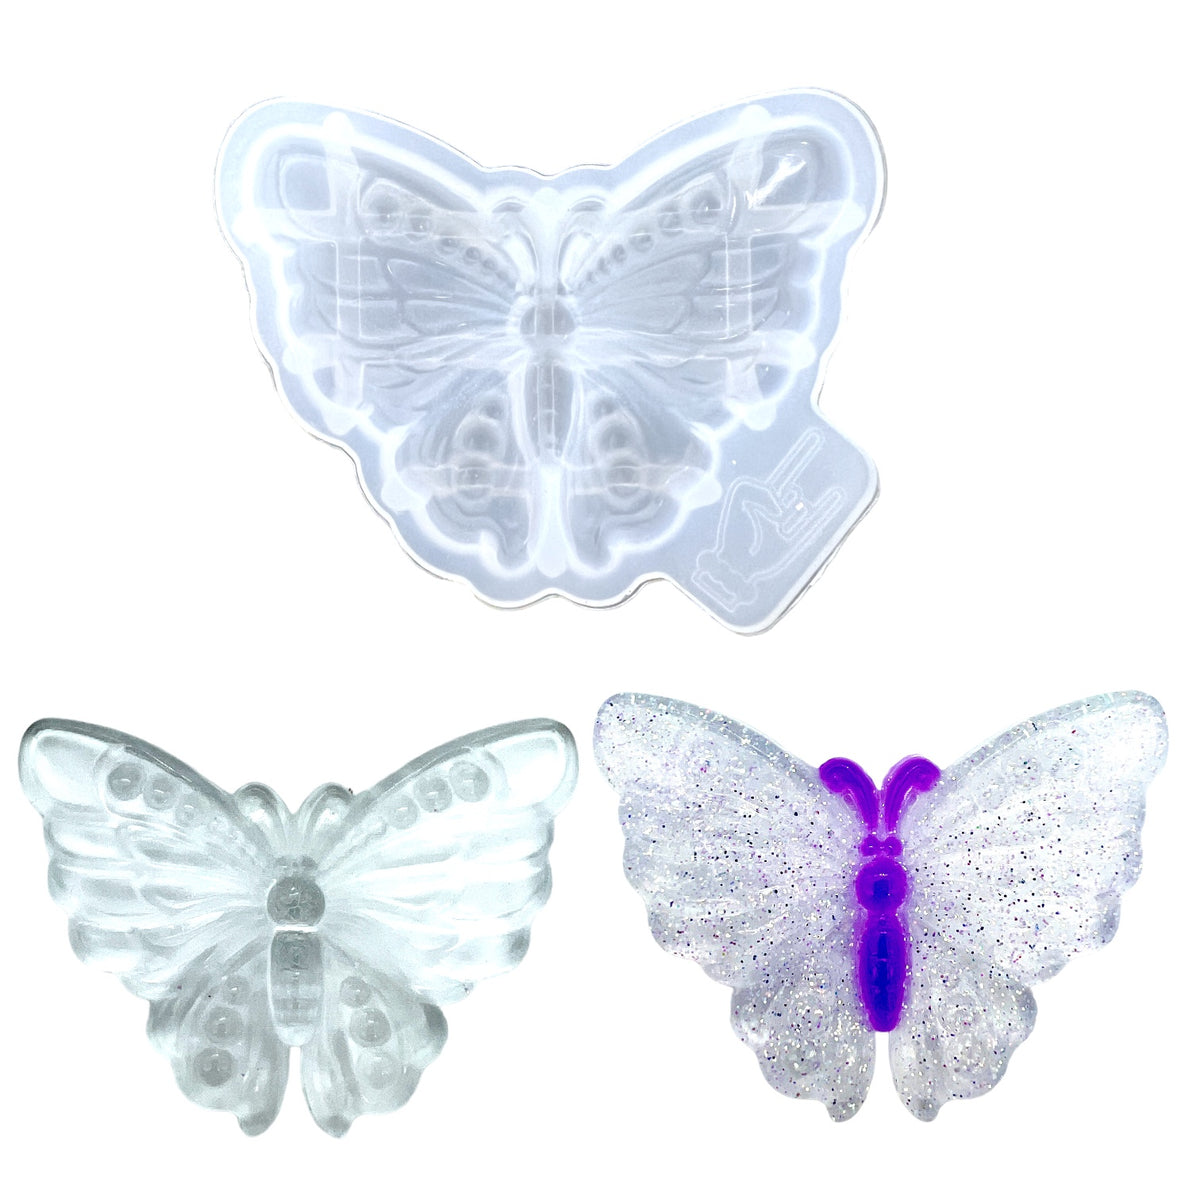 Butterfly Resin Rockers Exclusive Mold for UV and Epoxy Resin